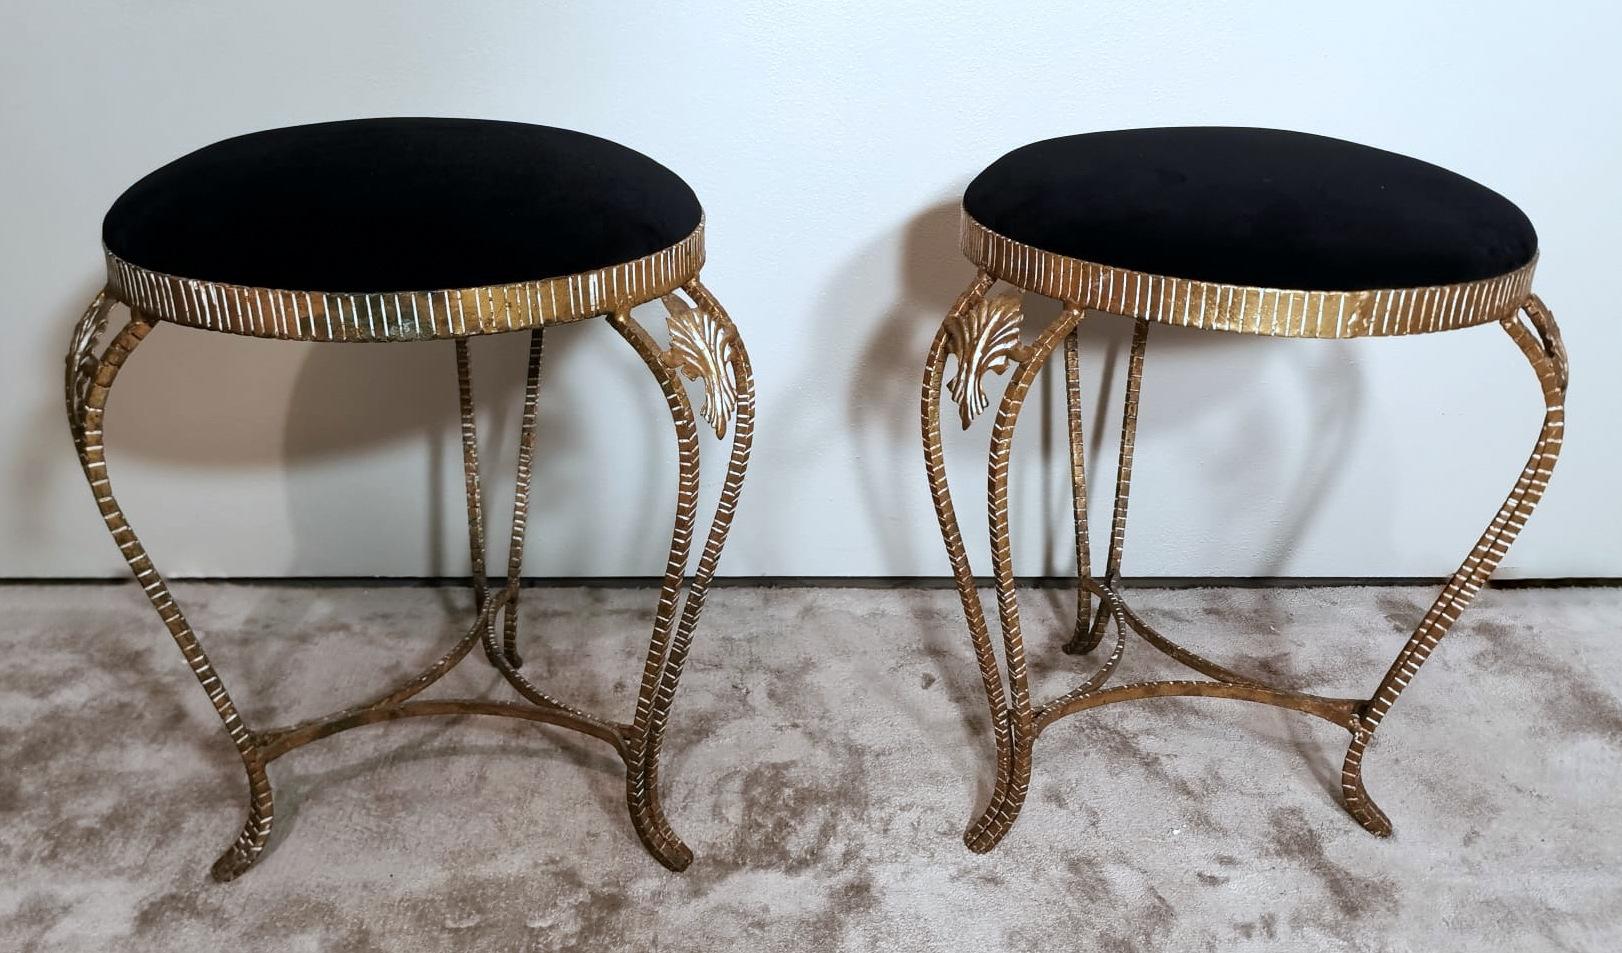 Pier Luigi Colli Attributed Pair Of Italian Gilt Iron And Velvet Stools In Good Condition For Sale In Prato, Tuscany